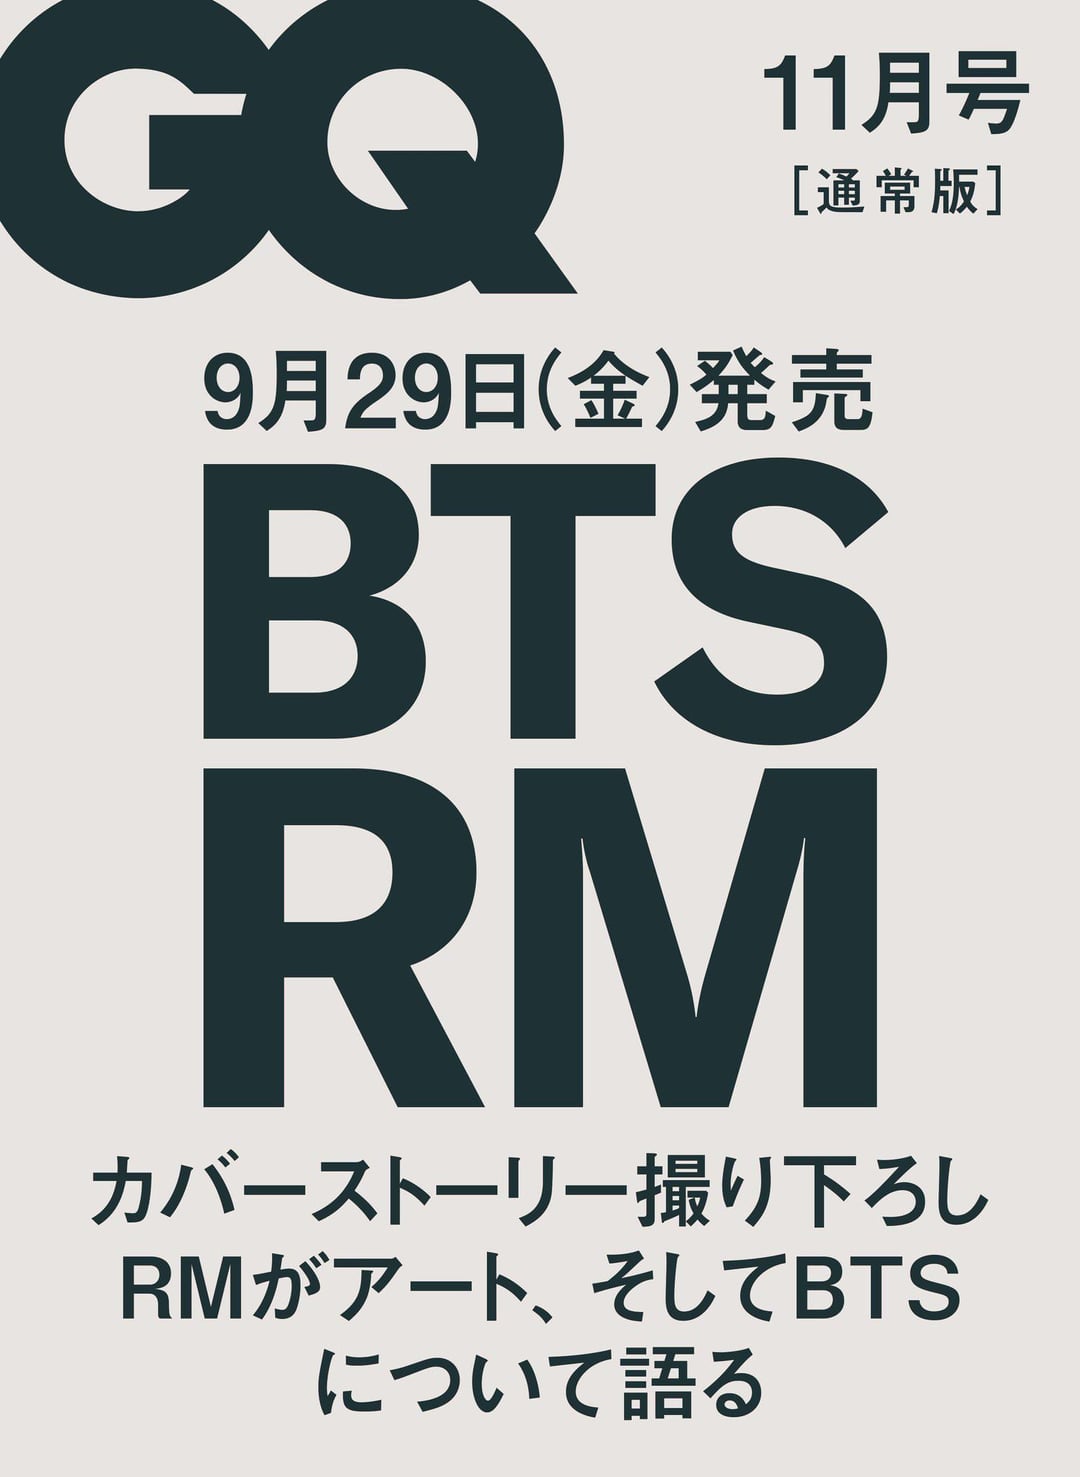 [BTS JAPAN OFFICIAL] RM will appear on the cover of the November 2023 issue of "GQ JAPAN"! - 010923